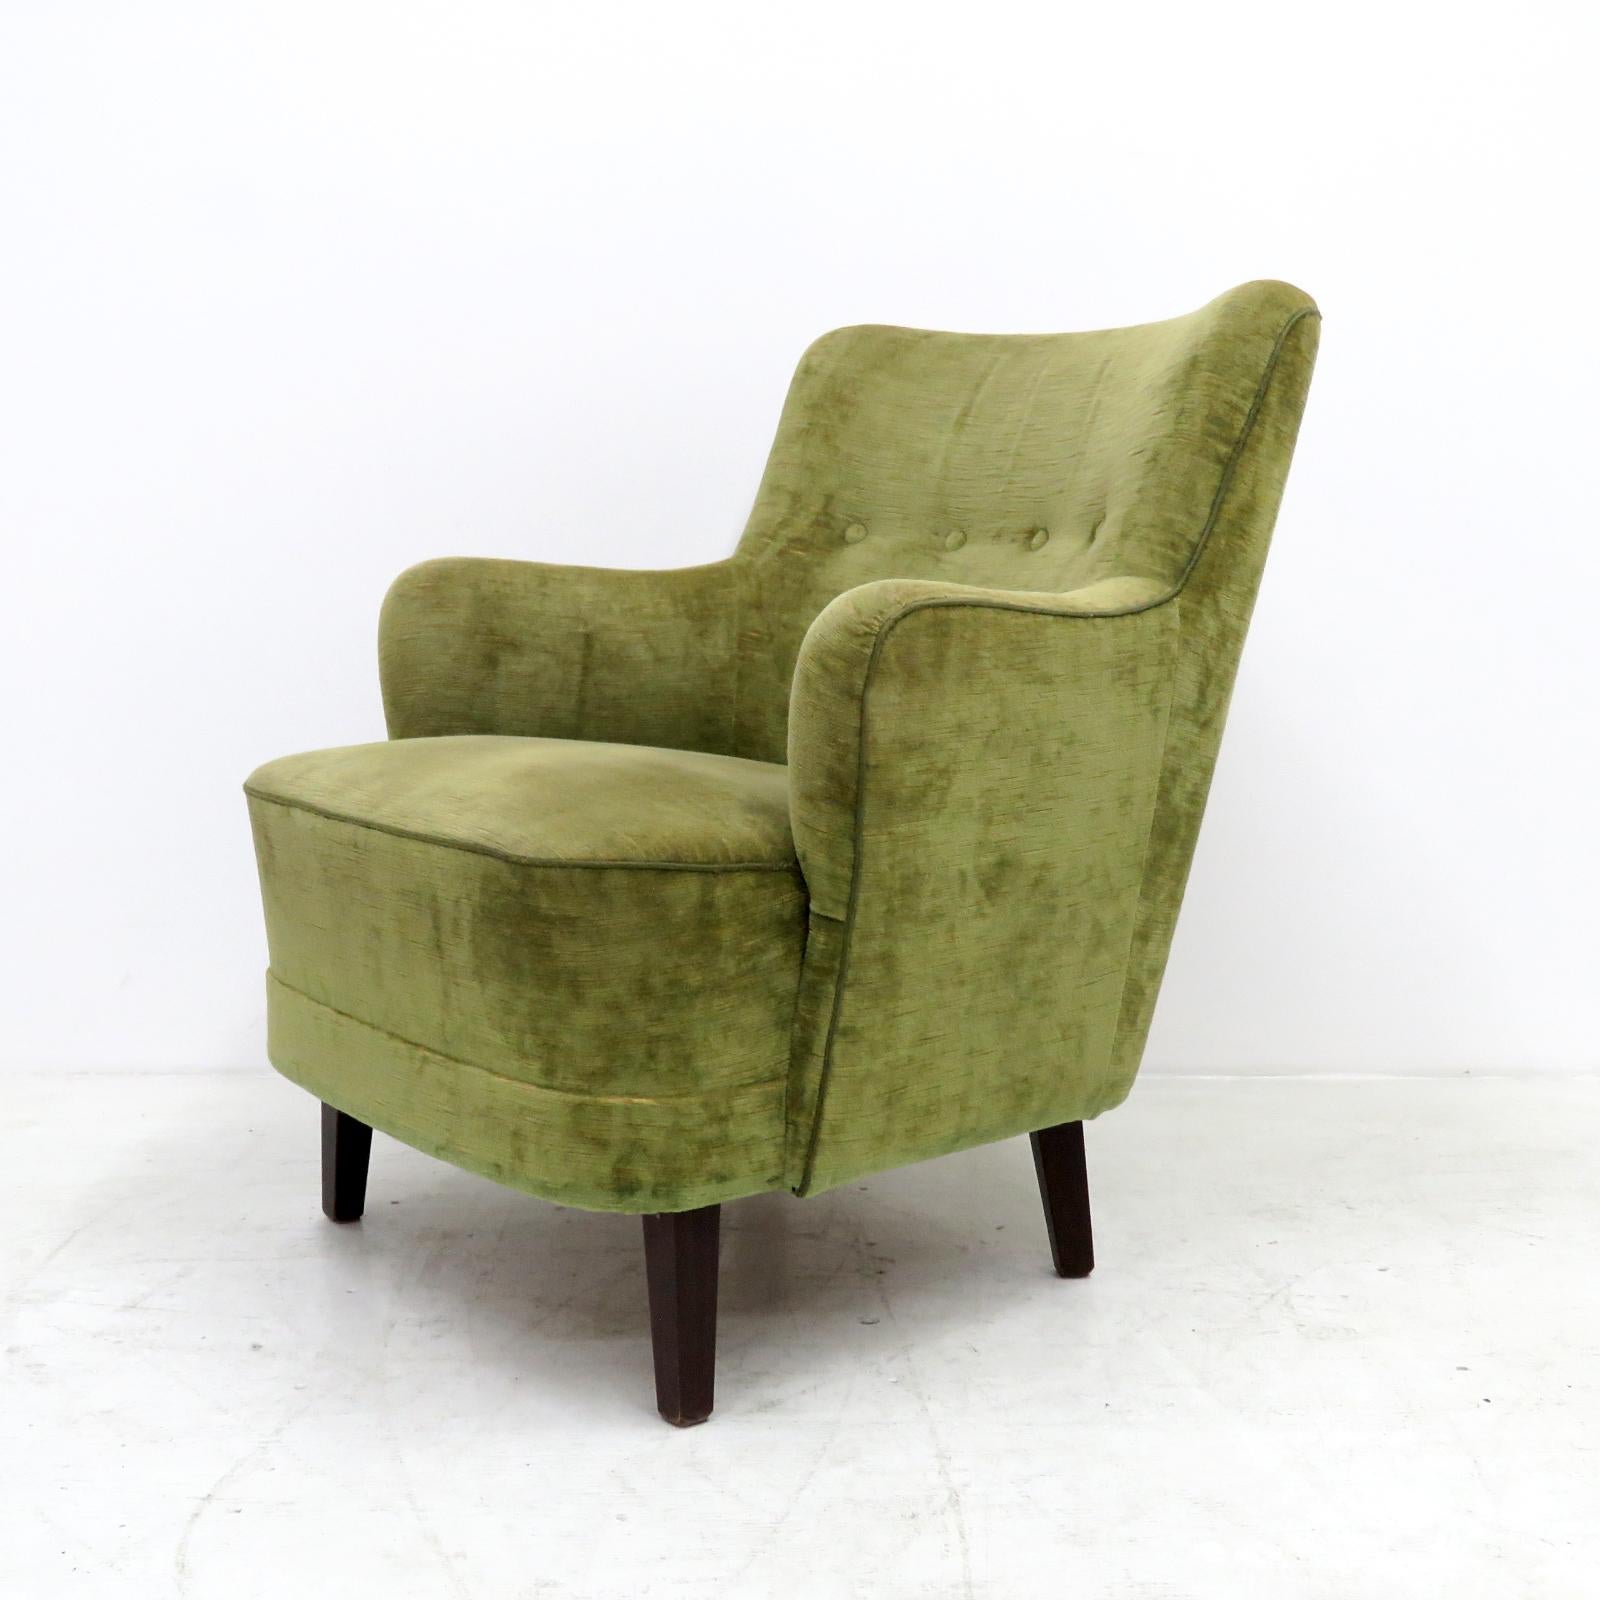 Stained Danish Modern Club Chairs, 1940 For Sale